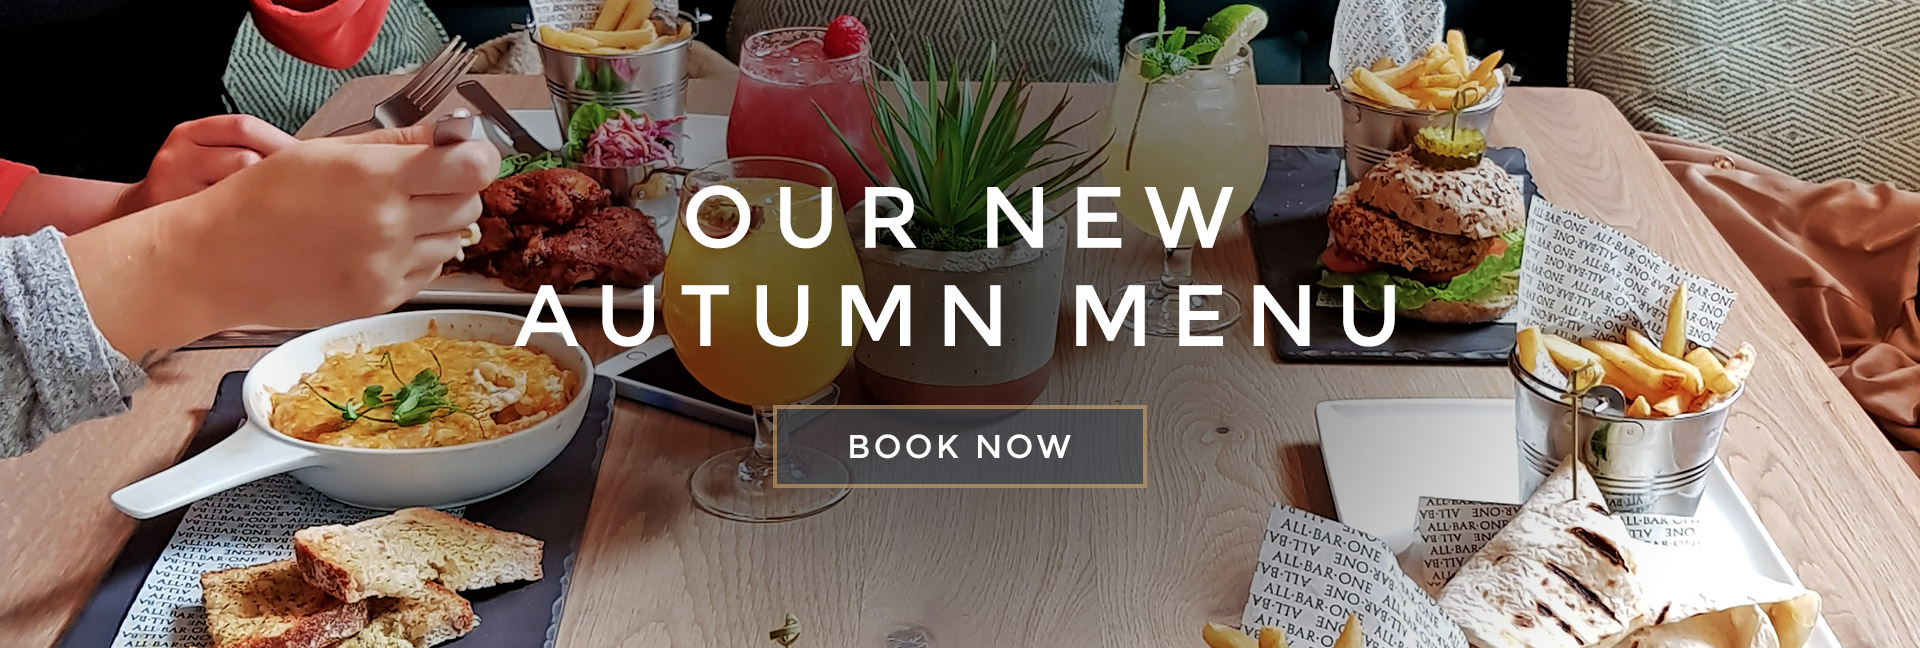 Our new Autumn menu at All Bar One New Street Station - Book now